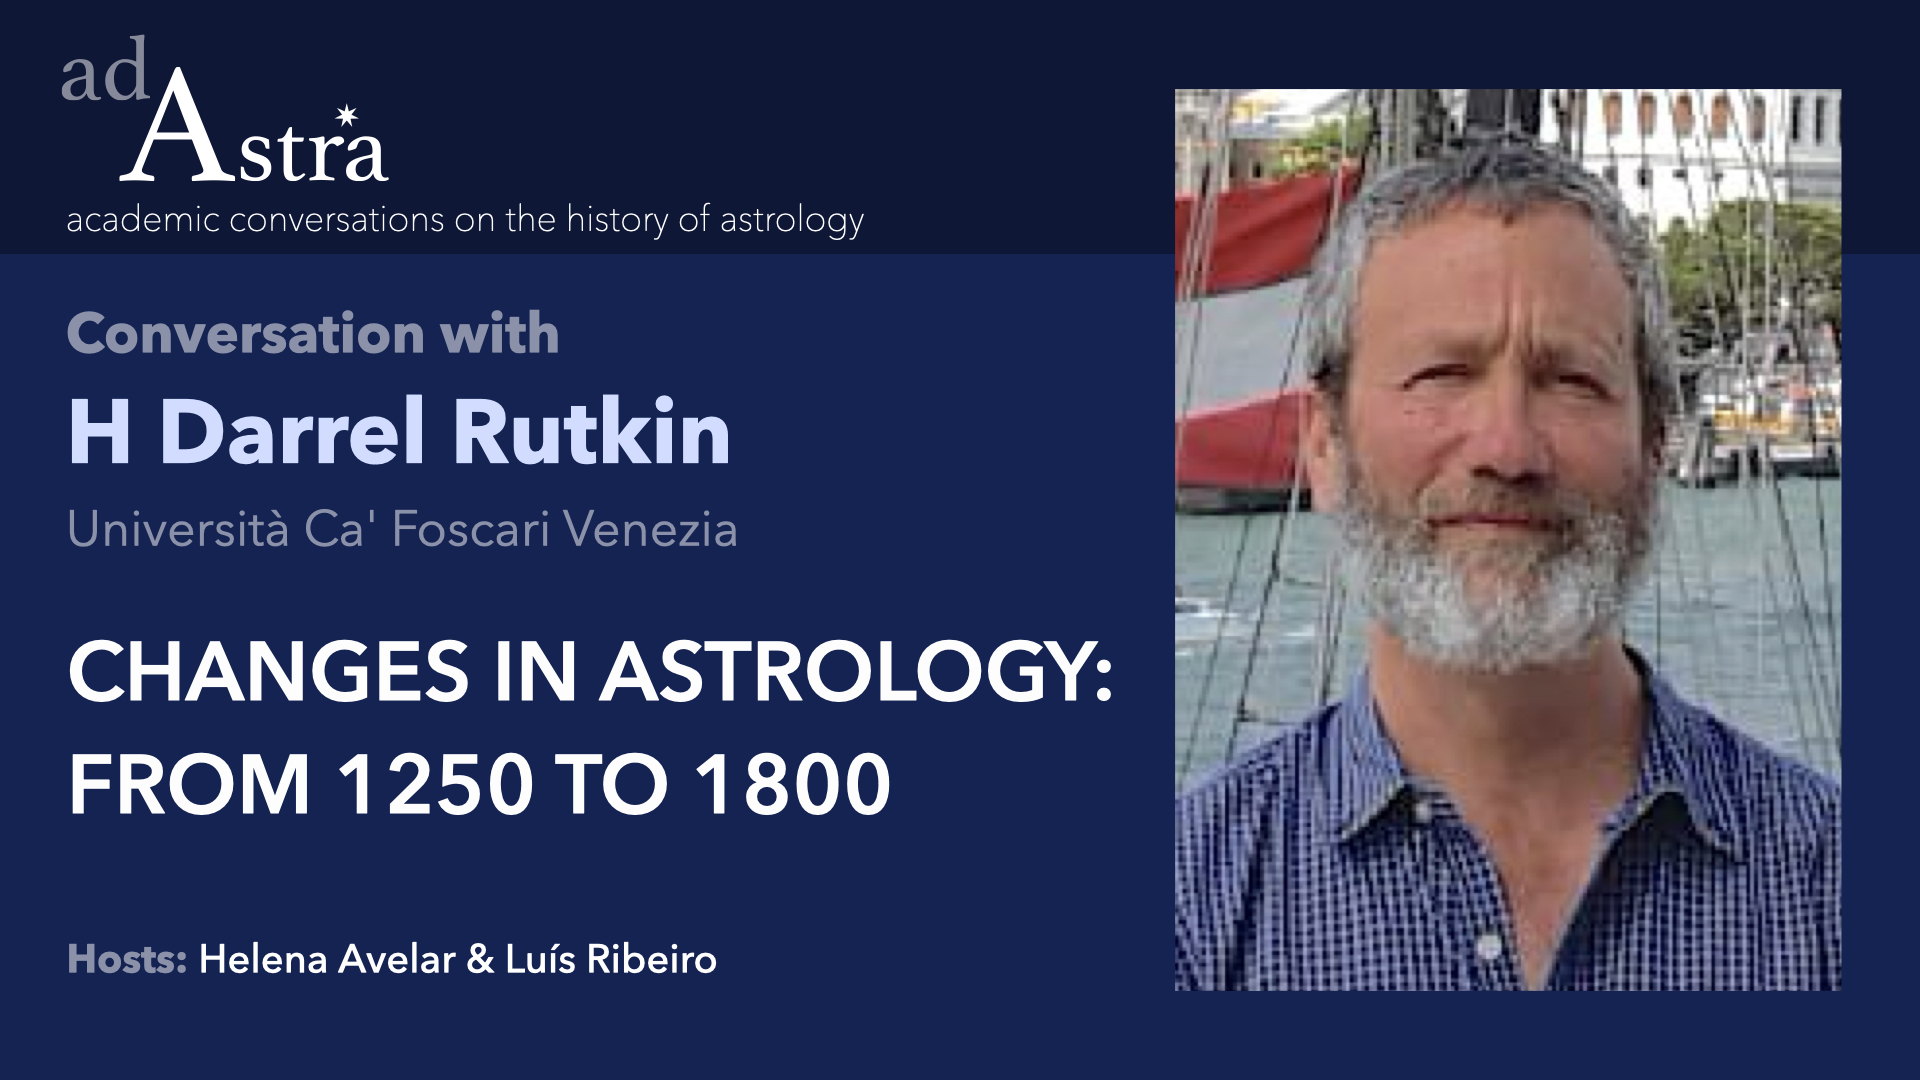 Changes in Astrology: from 1250 to 1800 with H Darrel Rutkin